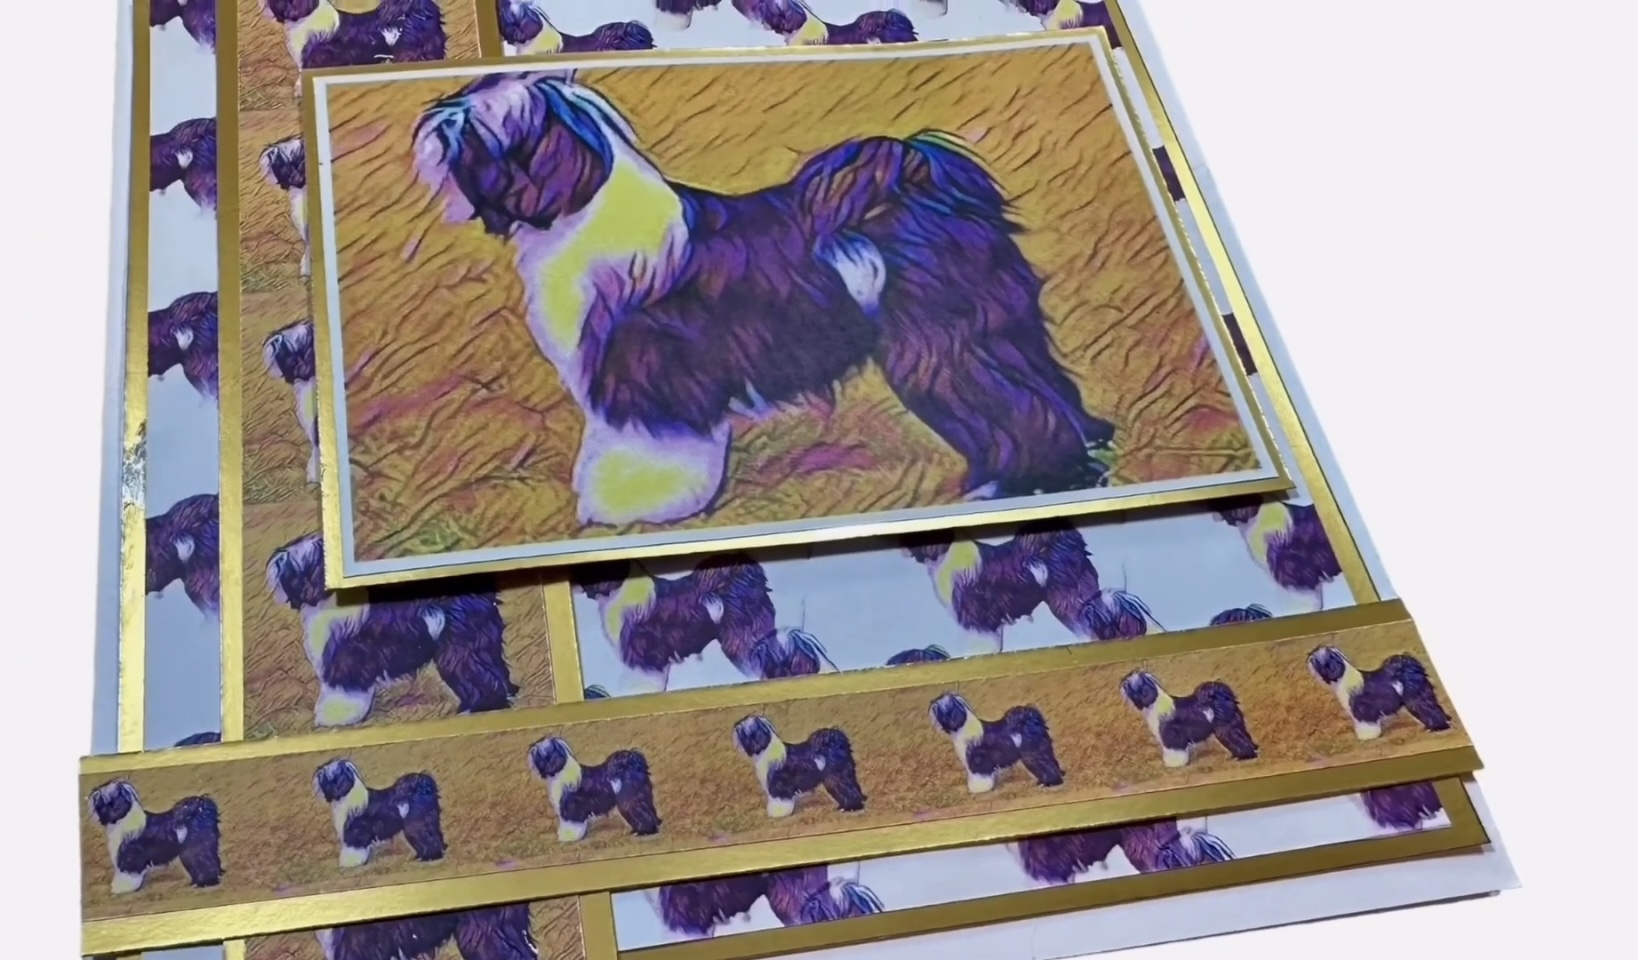 Tibetan Terrier Craft Download with Stan, our Crafting Dog